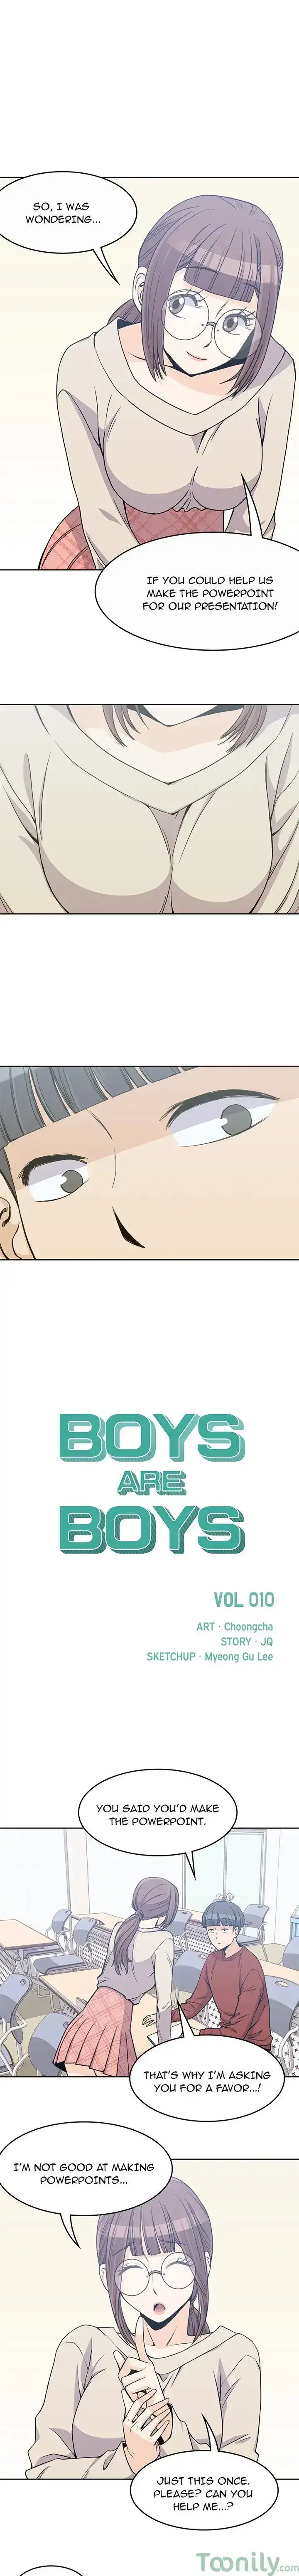 Boys are Boys - Chapter 10 Page 1